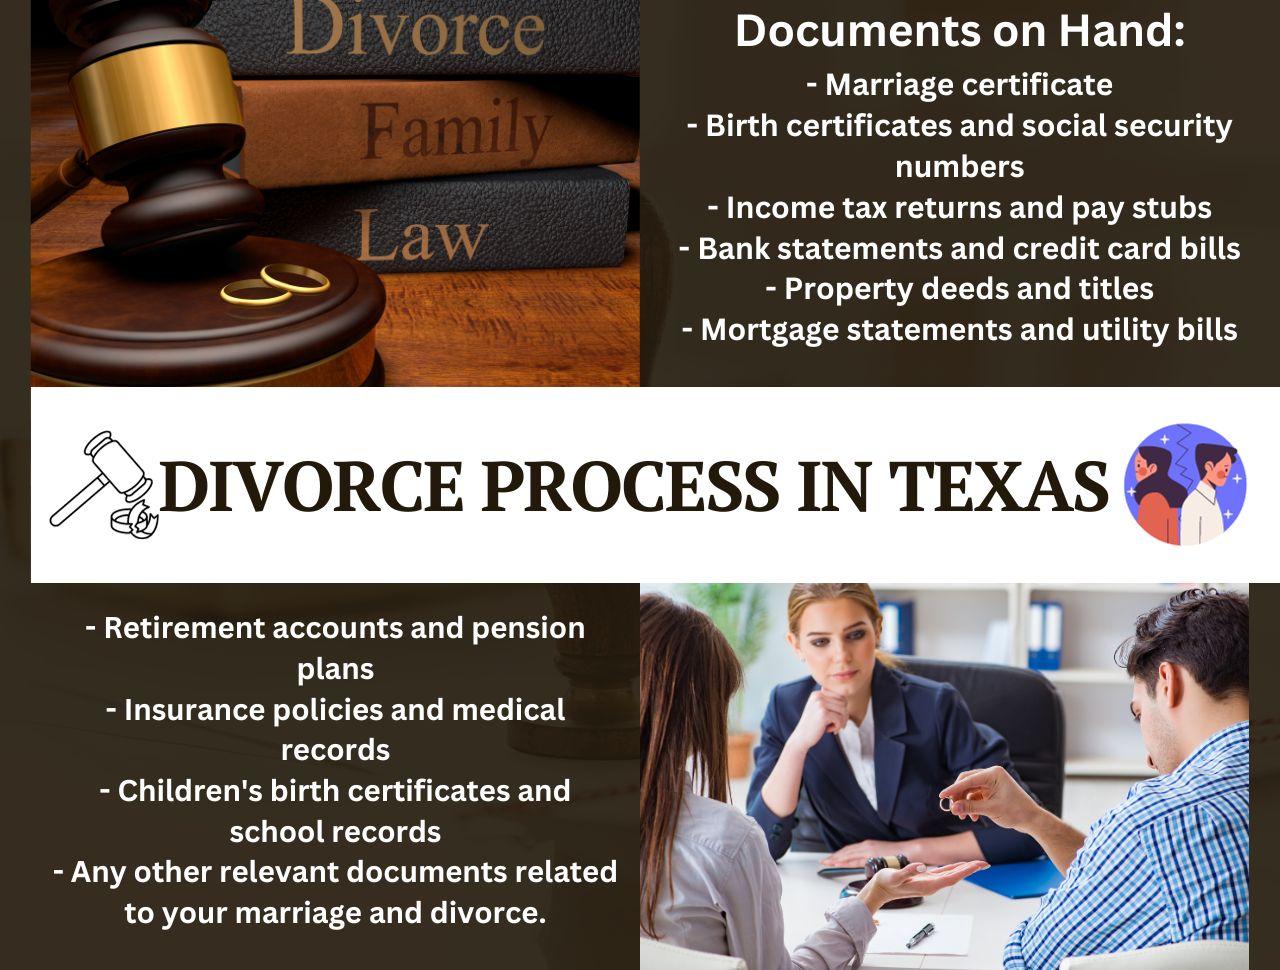 How to File for a Divorce in Texas: No Lawyer Needed, A DIY Guide